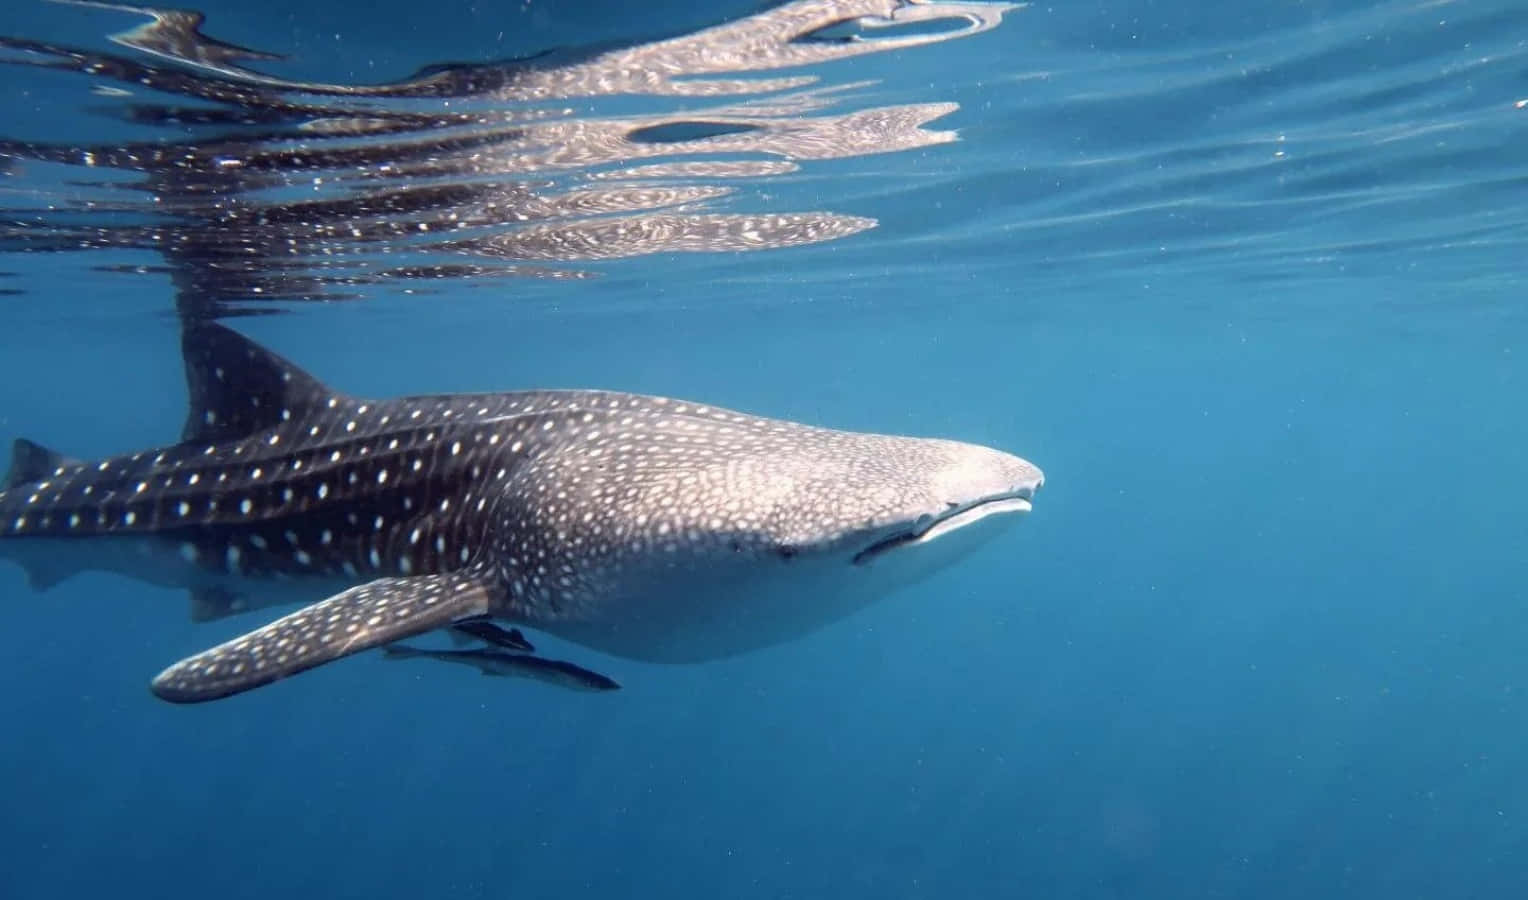 "Snorkeling with a Whale Shark"